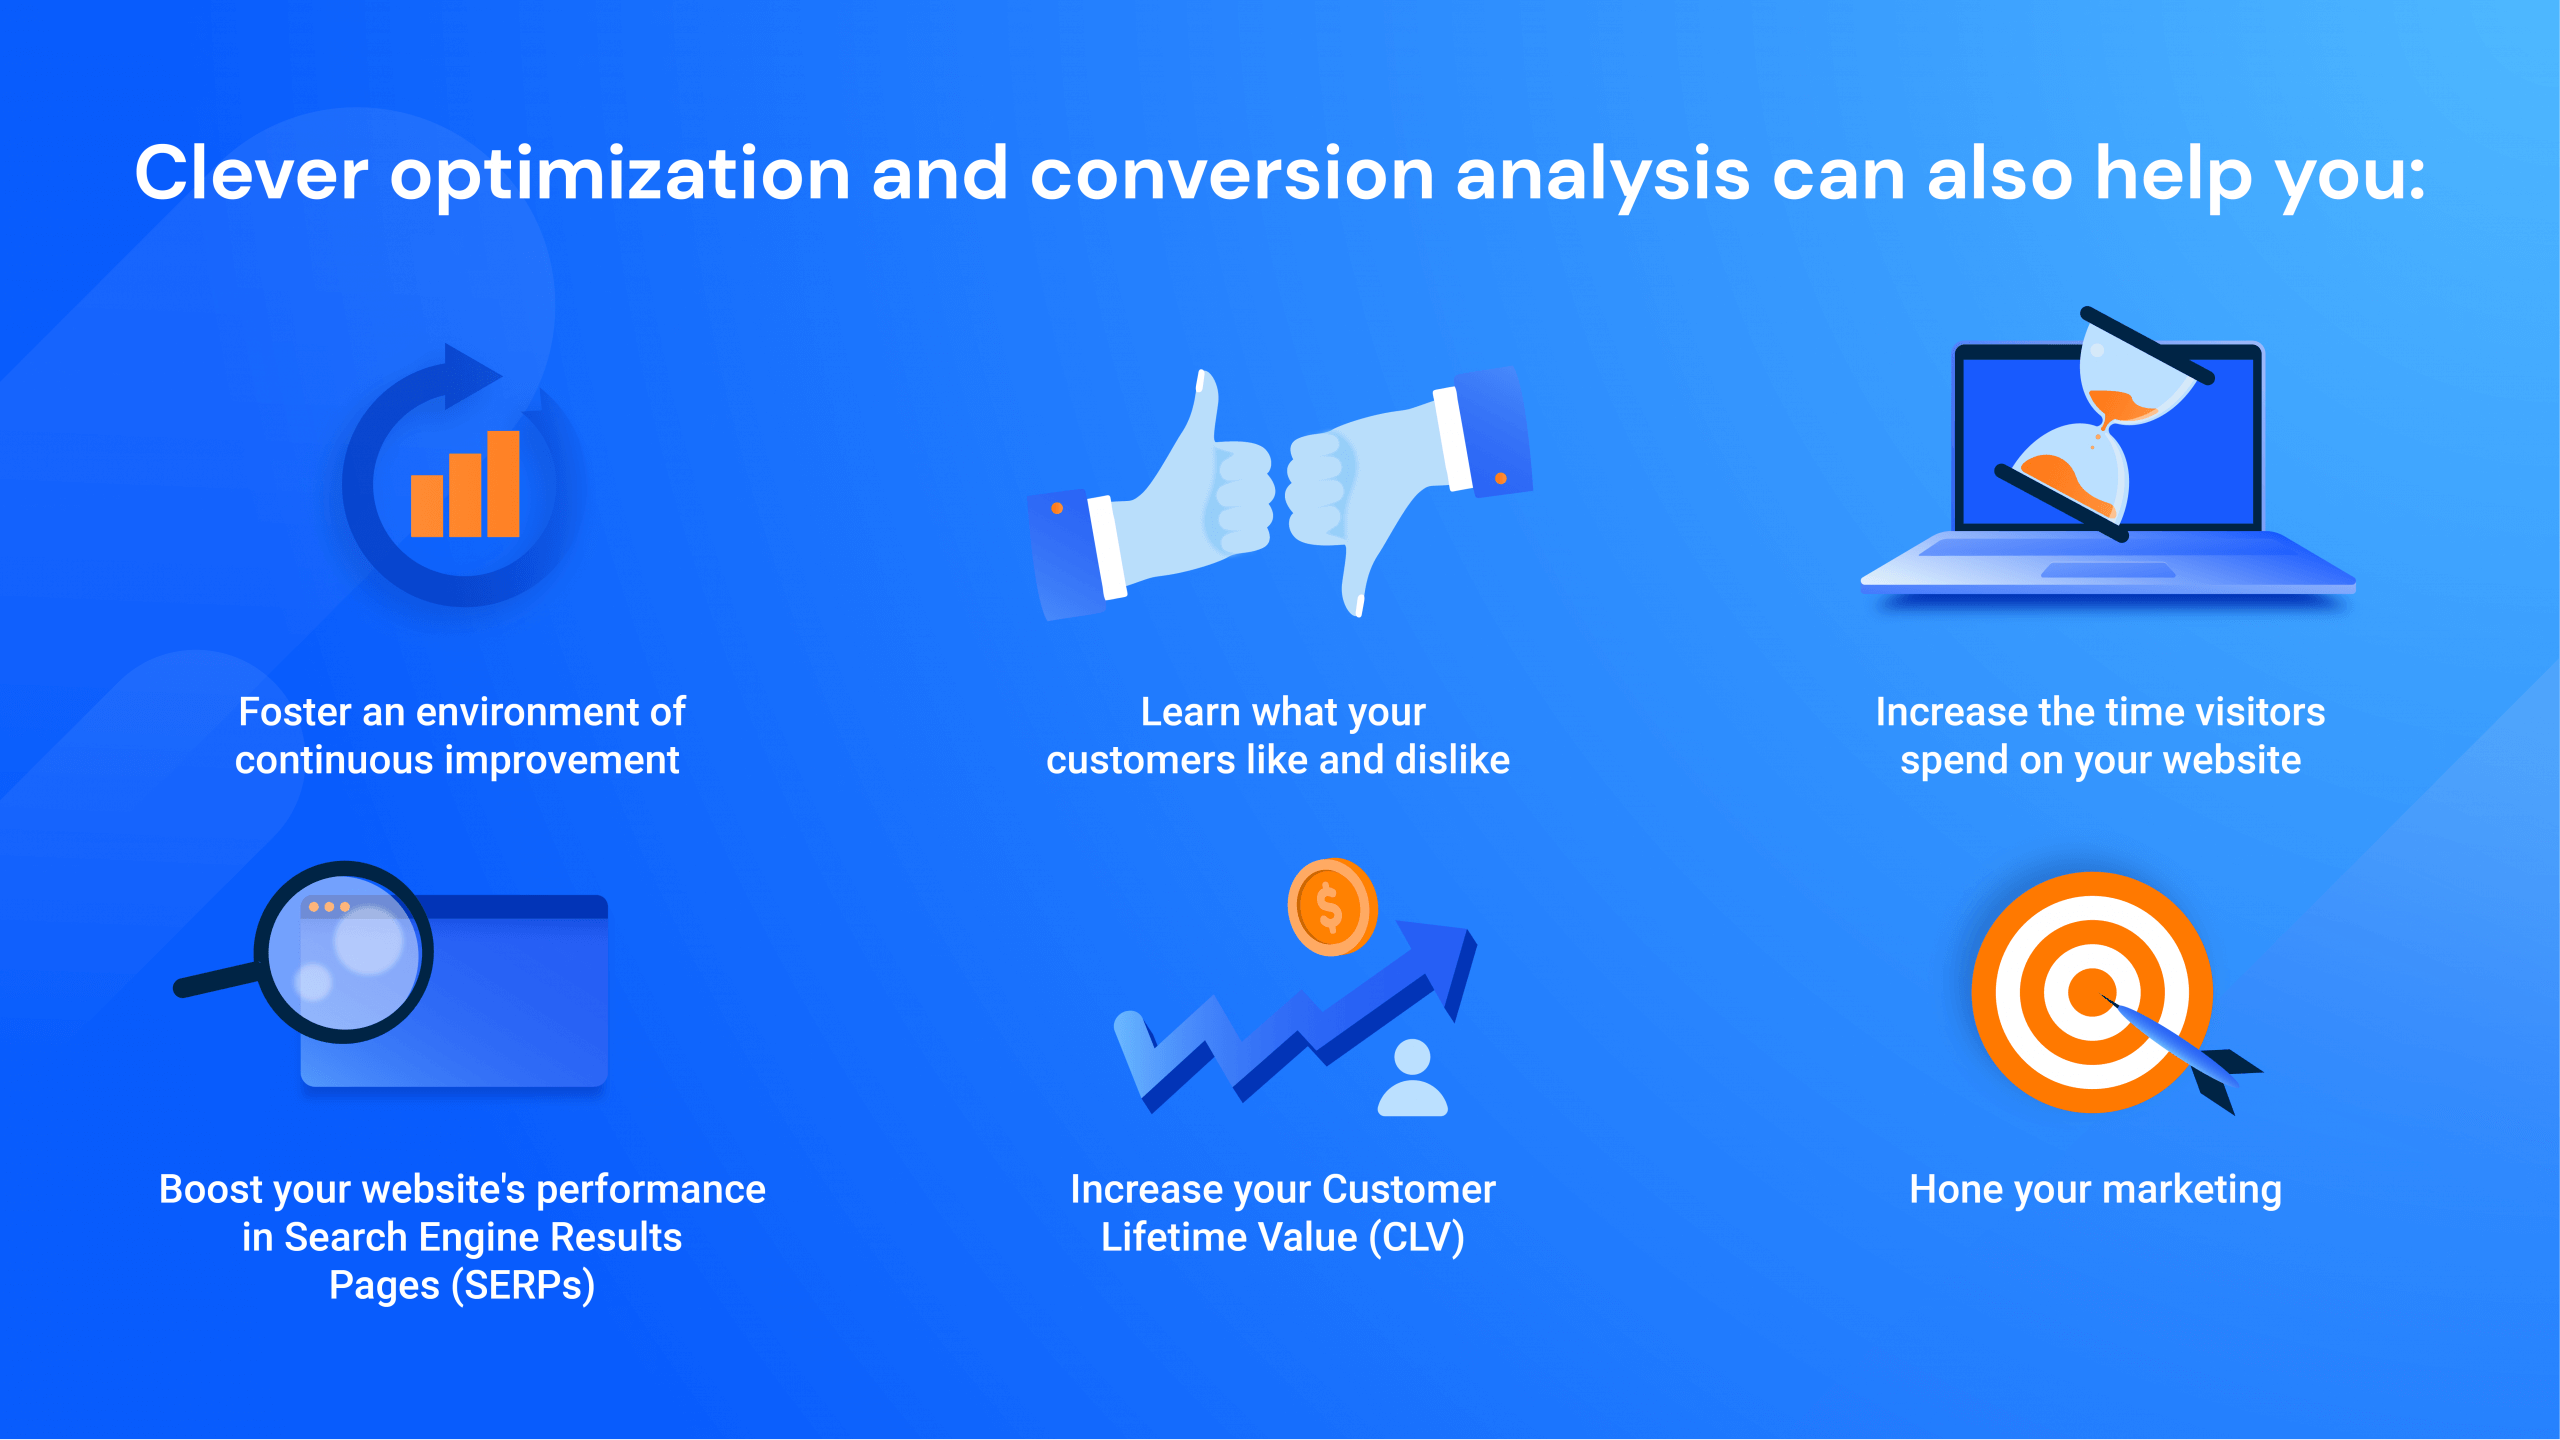 How optimization and conversion analysis can help you.